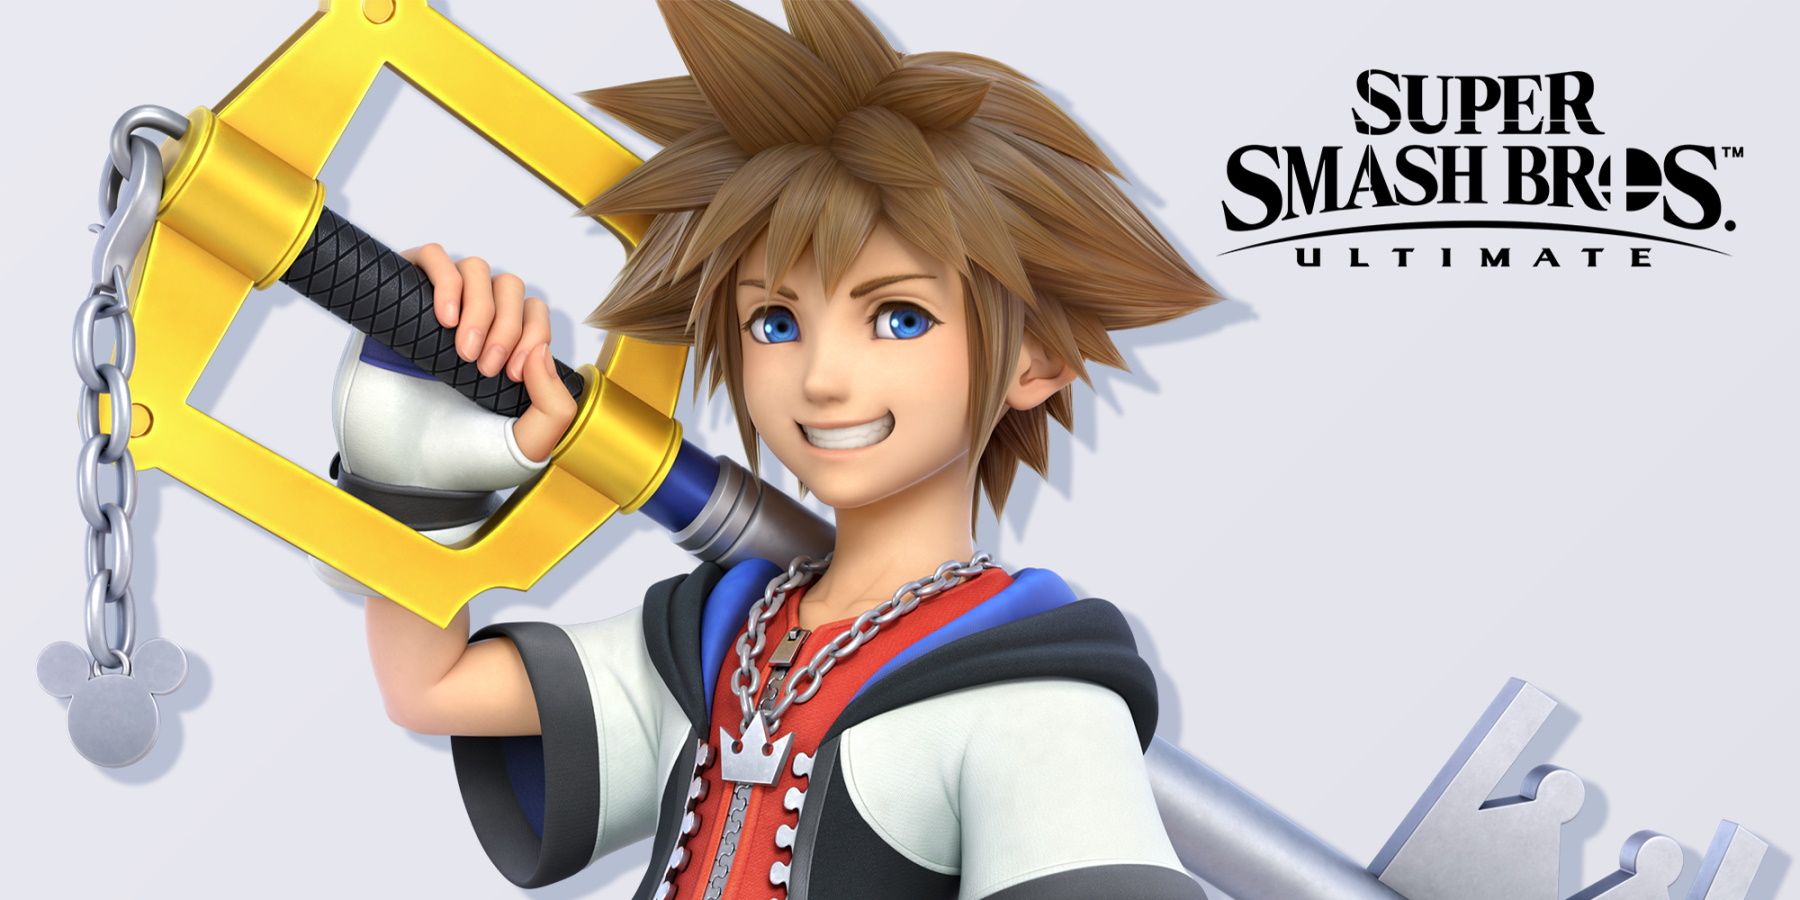 Sora Amiibo for Super Smash Bros. Ultimate 2 out of 2 image gallery